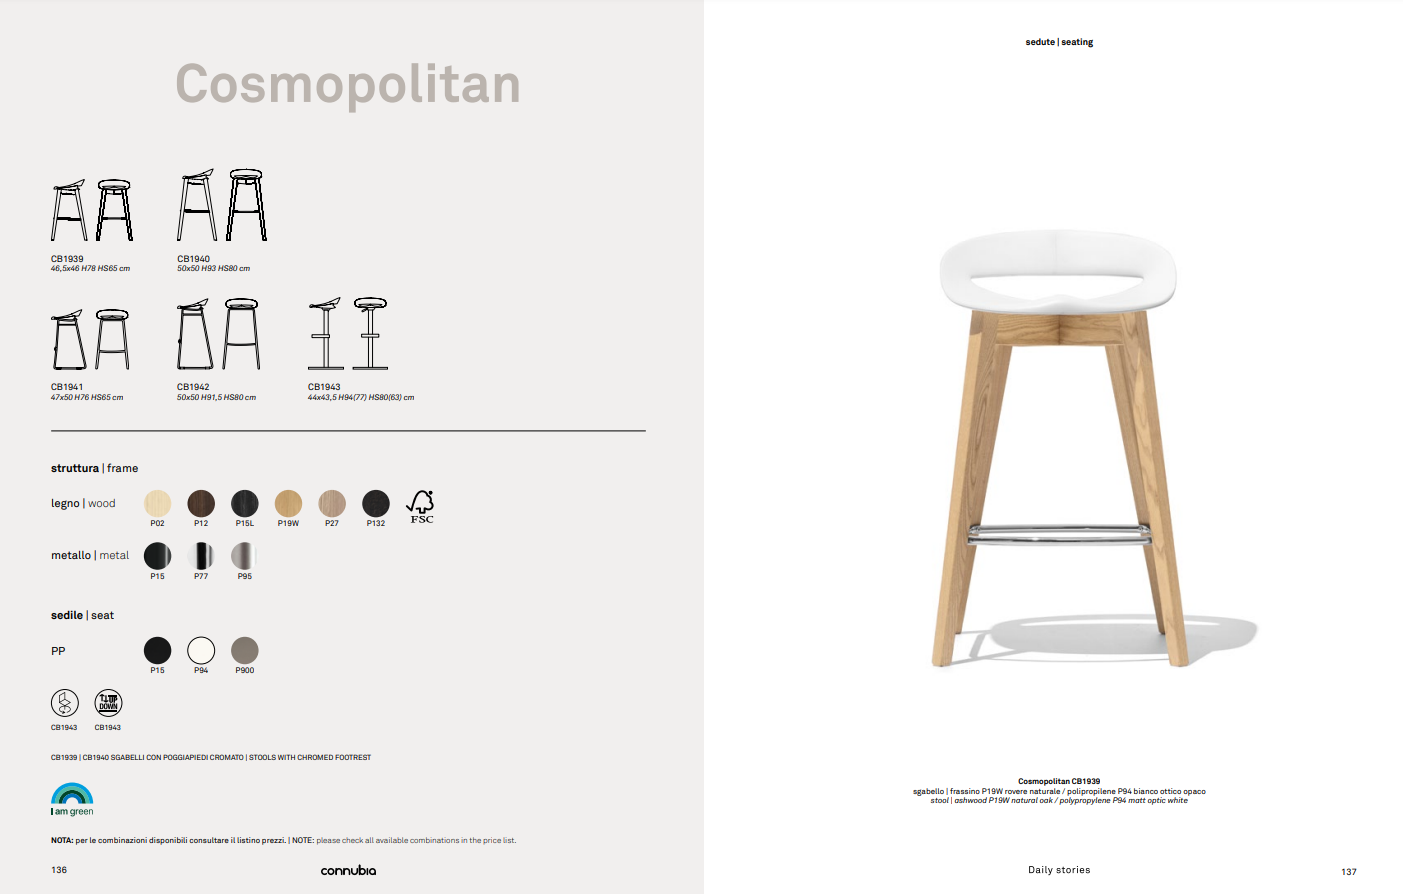 CB/1939 COSMOPOLITAN Stool by Connubia by Calligaris